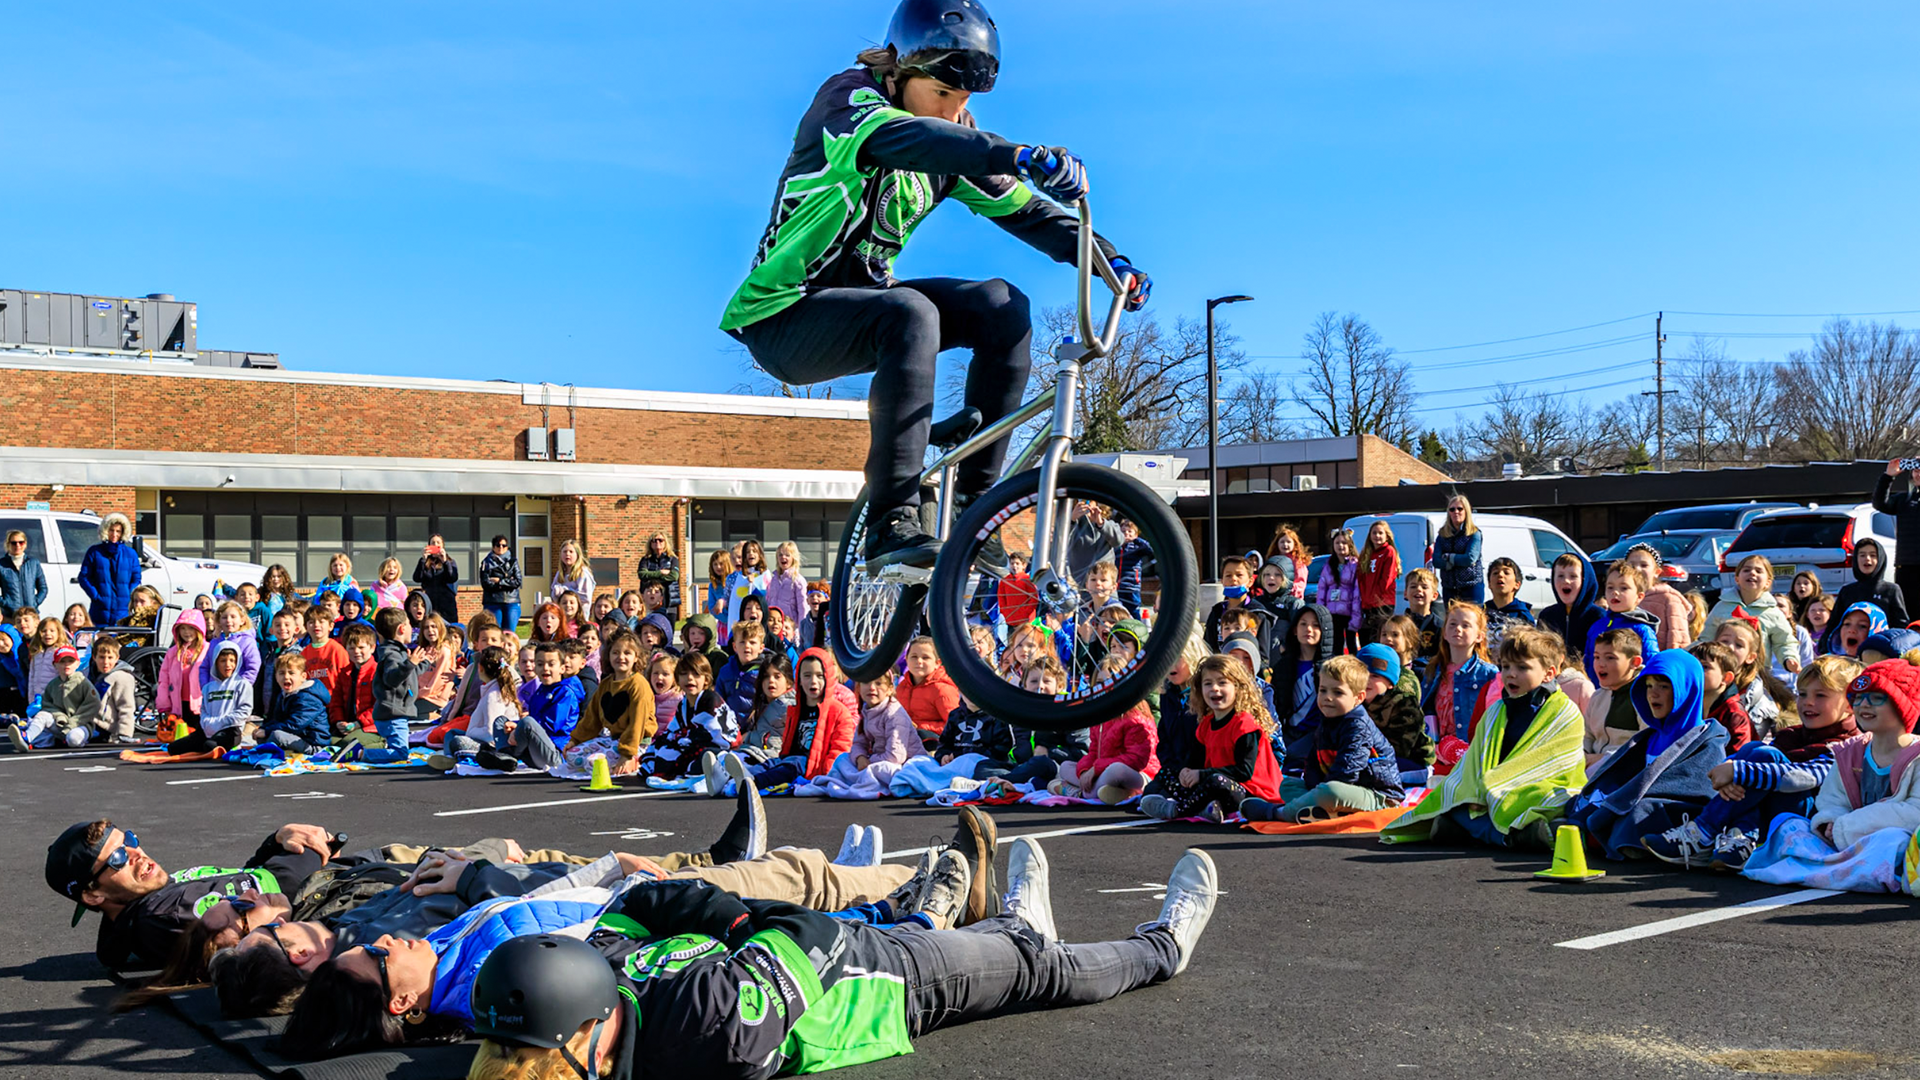 HUGE HOP! BMX pro Ricky Veronick clears 5 brave teachers at a school in Fair Haven New Jersey